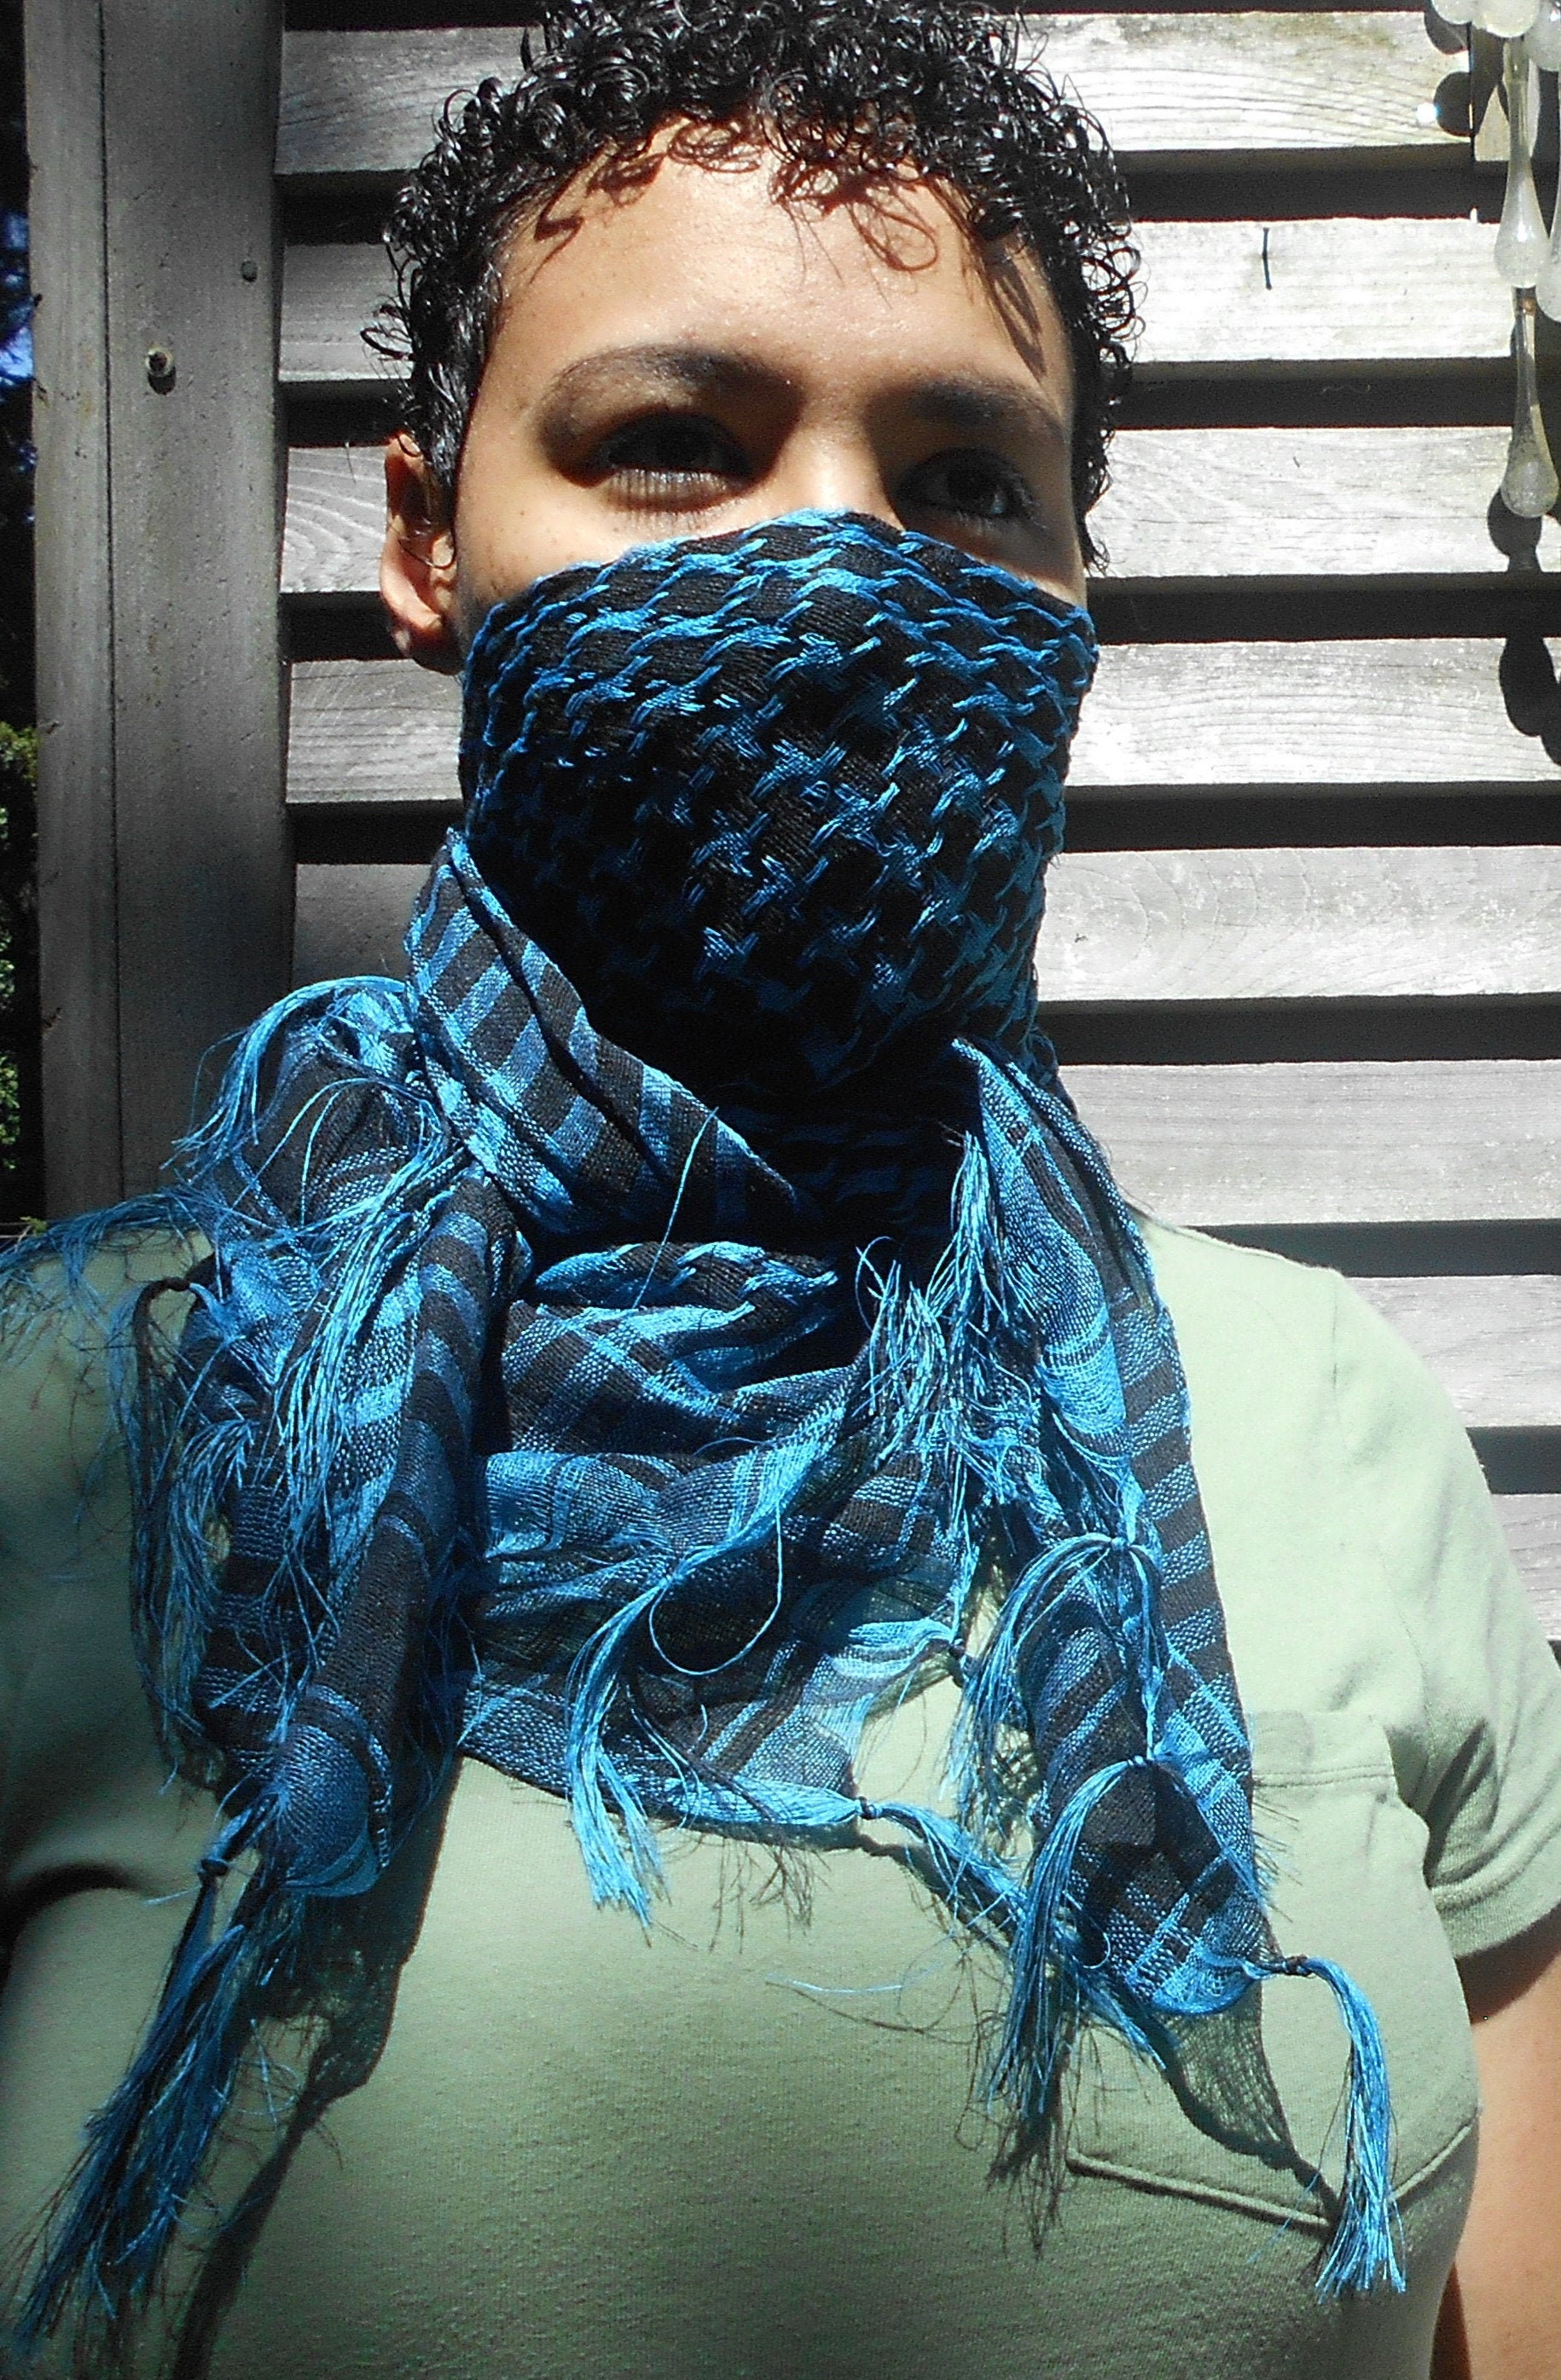 Festival Desert Scarf, Palestine Scarf,Bandana, Face Cover,Military Keffiyeh,Turquoise  and Black,Best Friend Gift